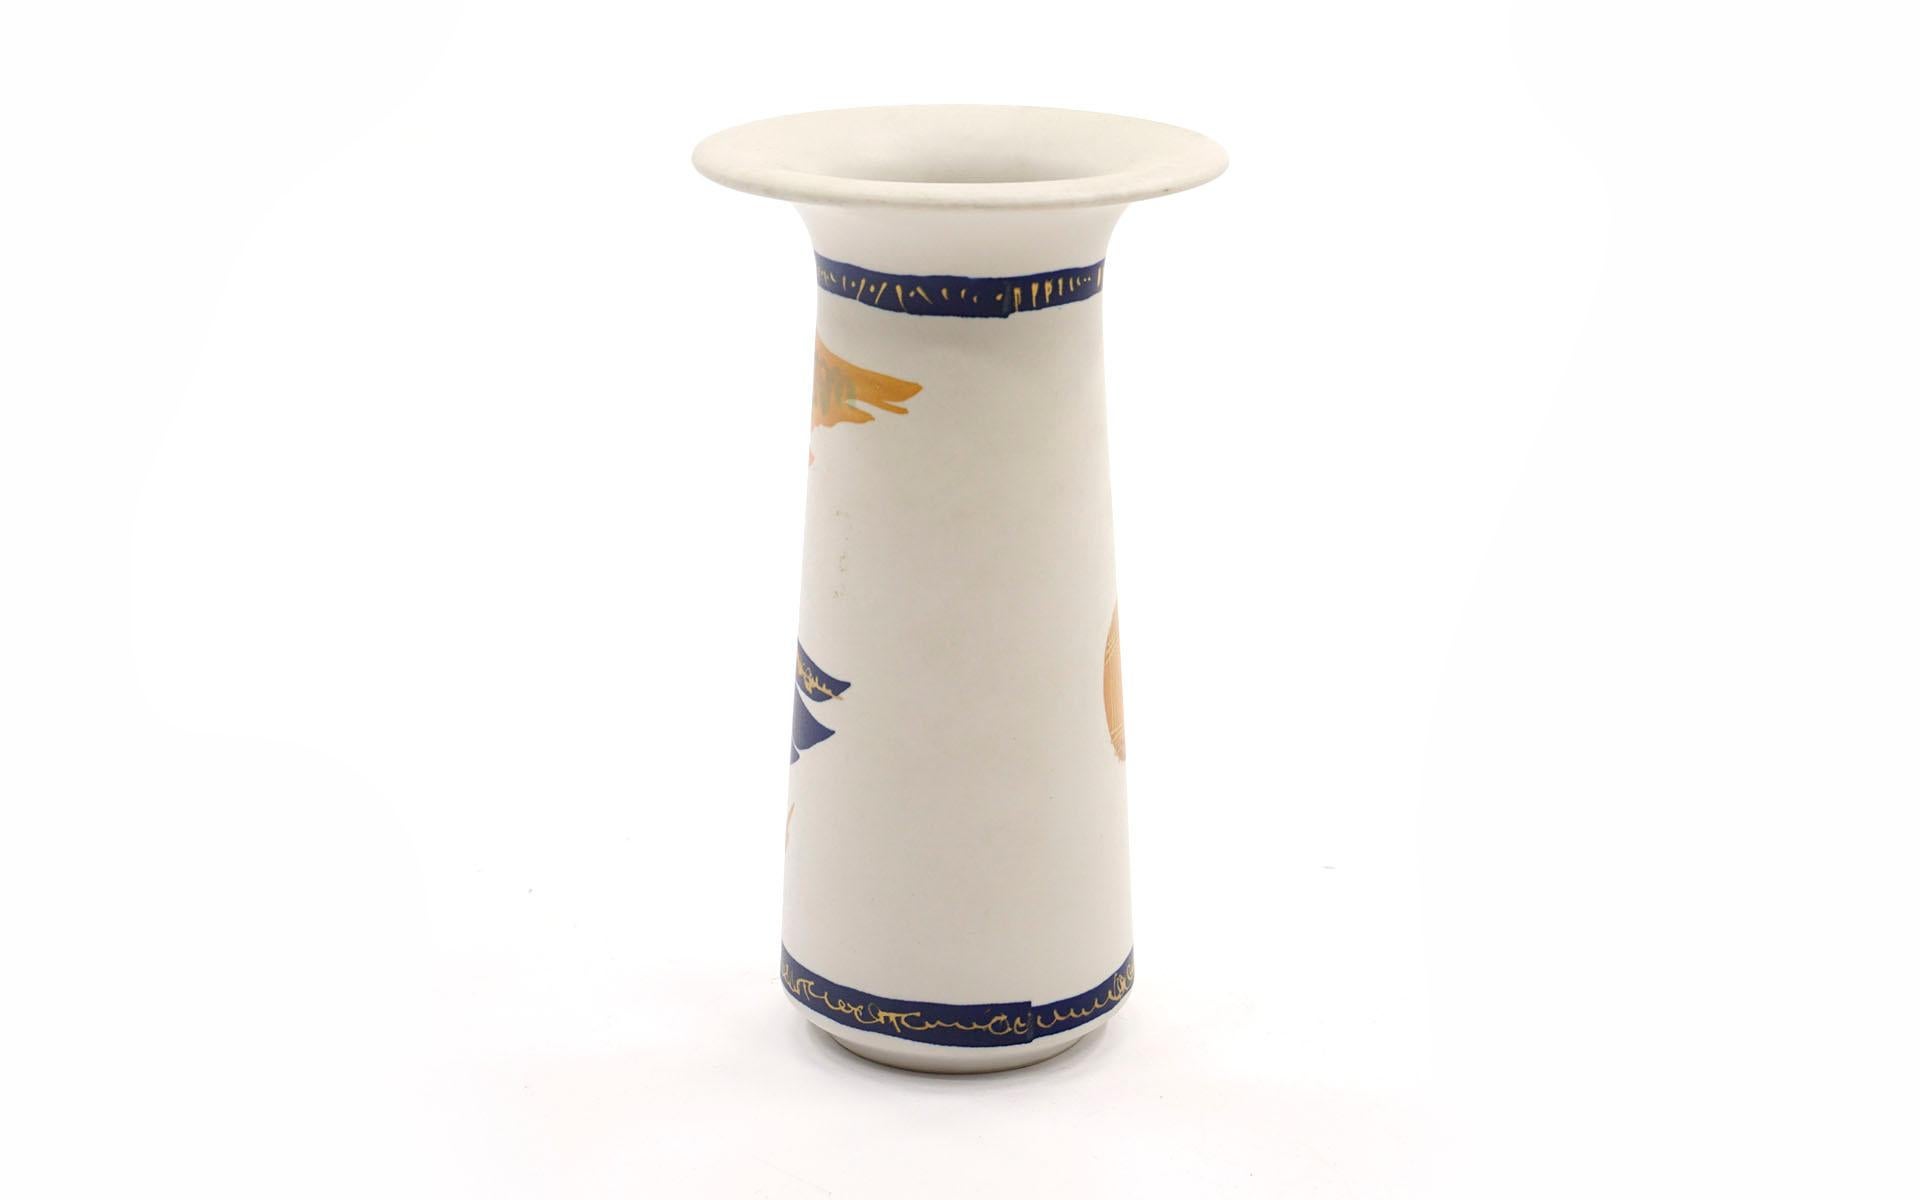 Abstract hand painted ceramic pottery vase by Rosenthal, Germany, 1960s. No chips, cracks, or repairs. Small areas of discoloration from use over time. A fine example and ready to use.